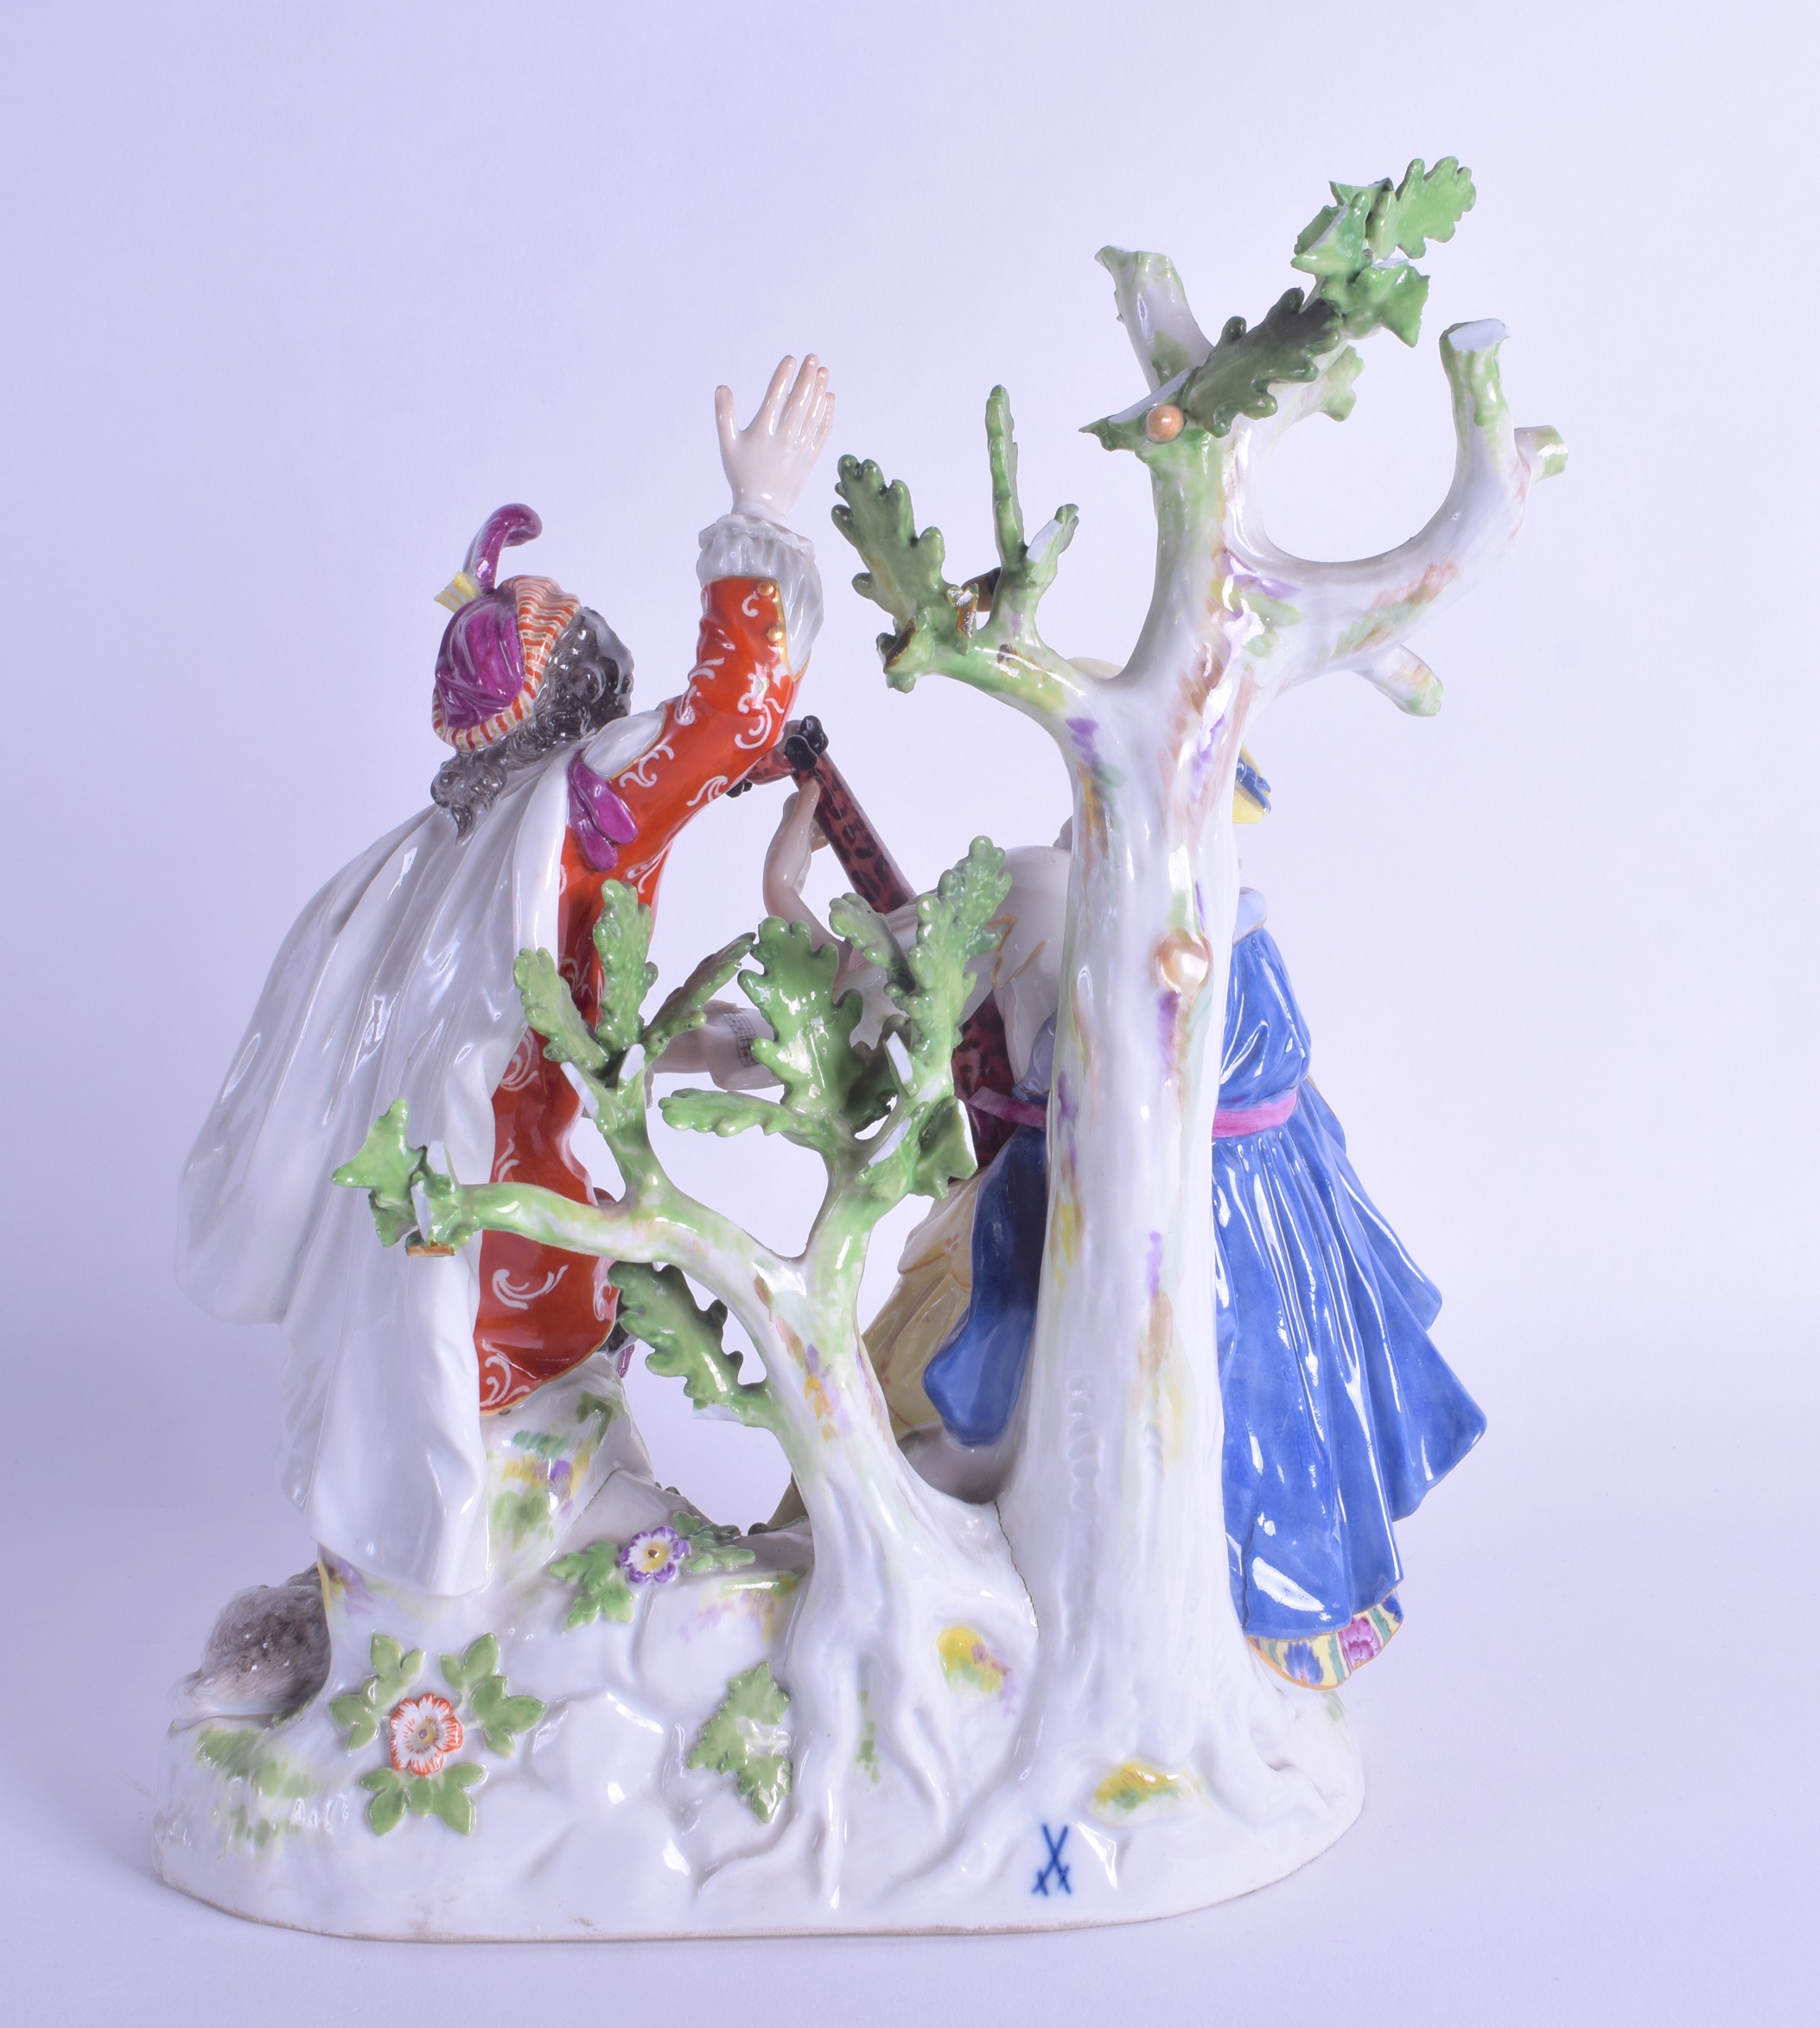 A LARGE 19TH CENTURY MEISSEN PORCELAIN FIGURAL GROUP depicting a male and female performing under - Image 4 of 4